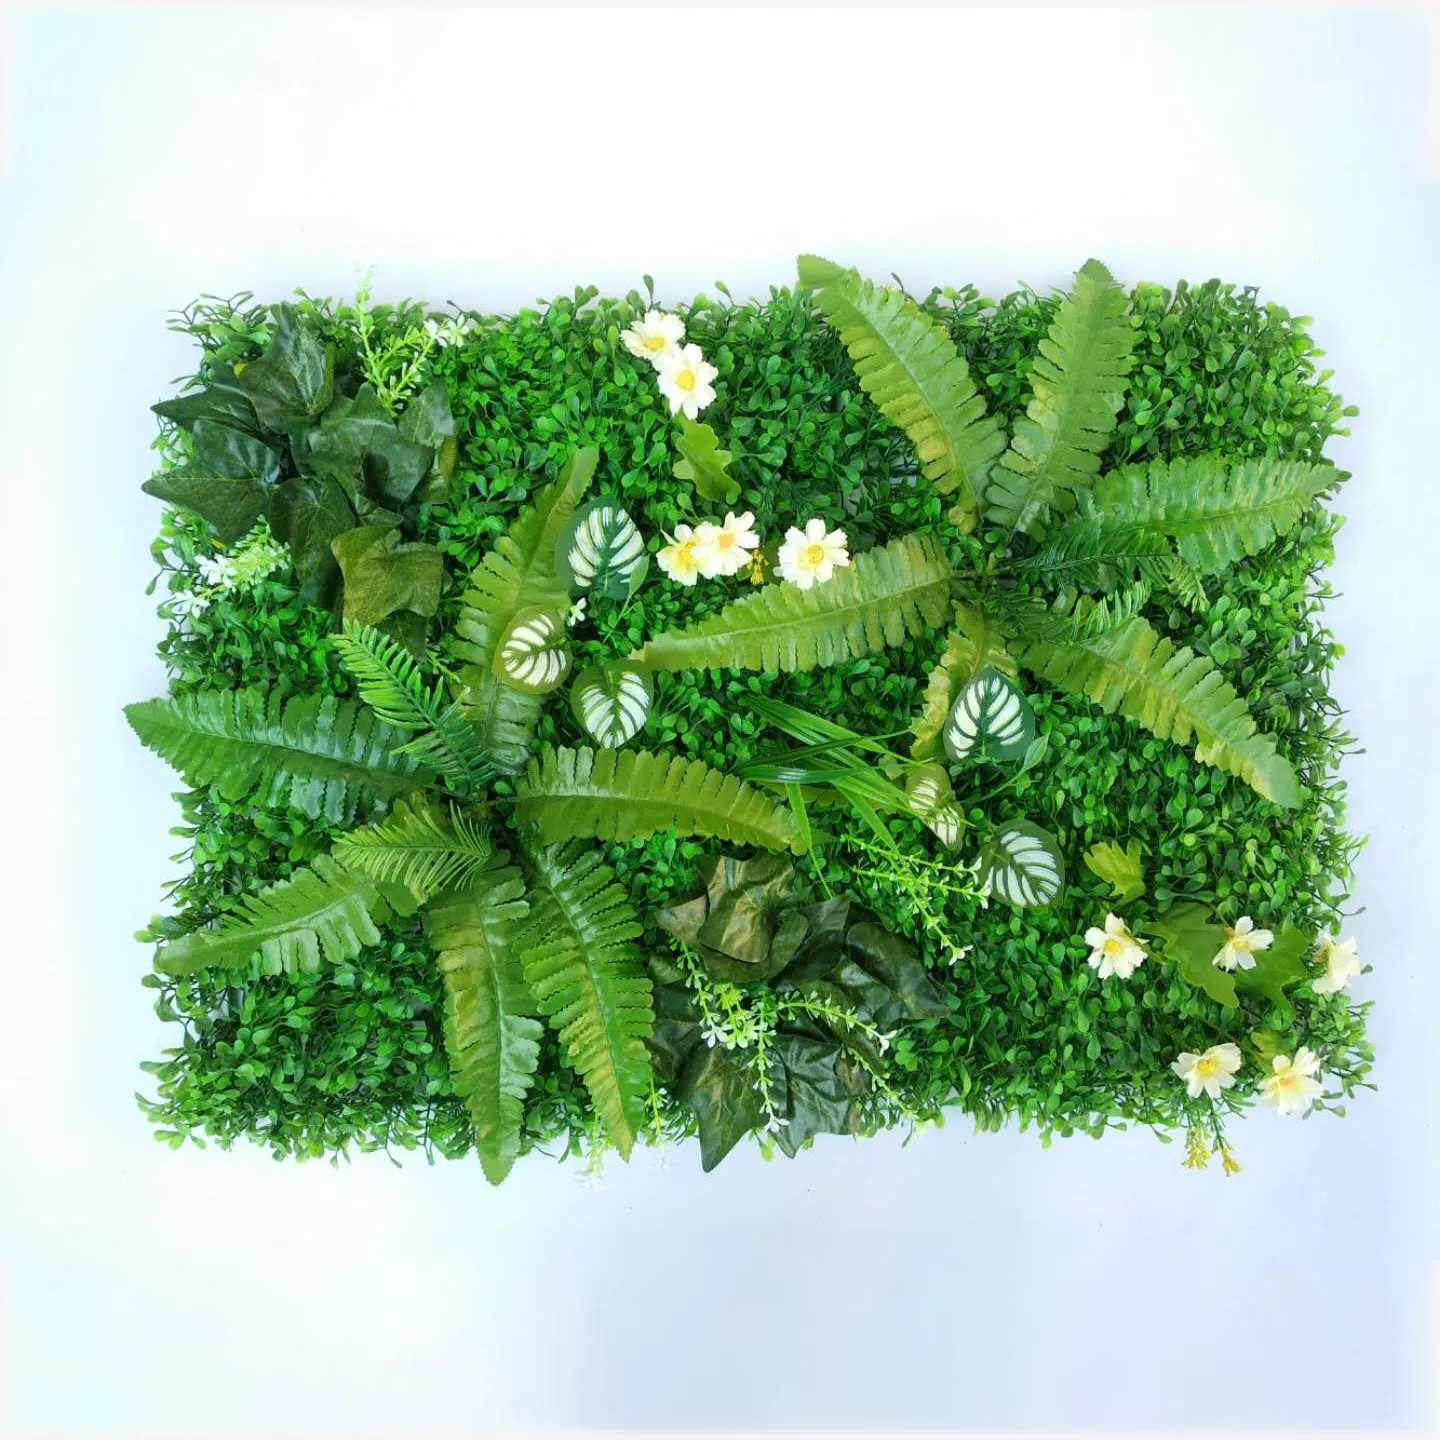 X326 New Outdoor Indoor Decor Faux Tropical Leaves Wall Green Garden Artificial Vertical Plant Wall Backdrop Panel Grass Wall